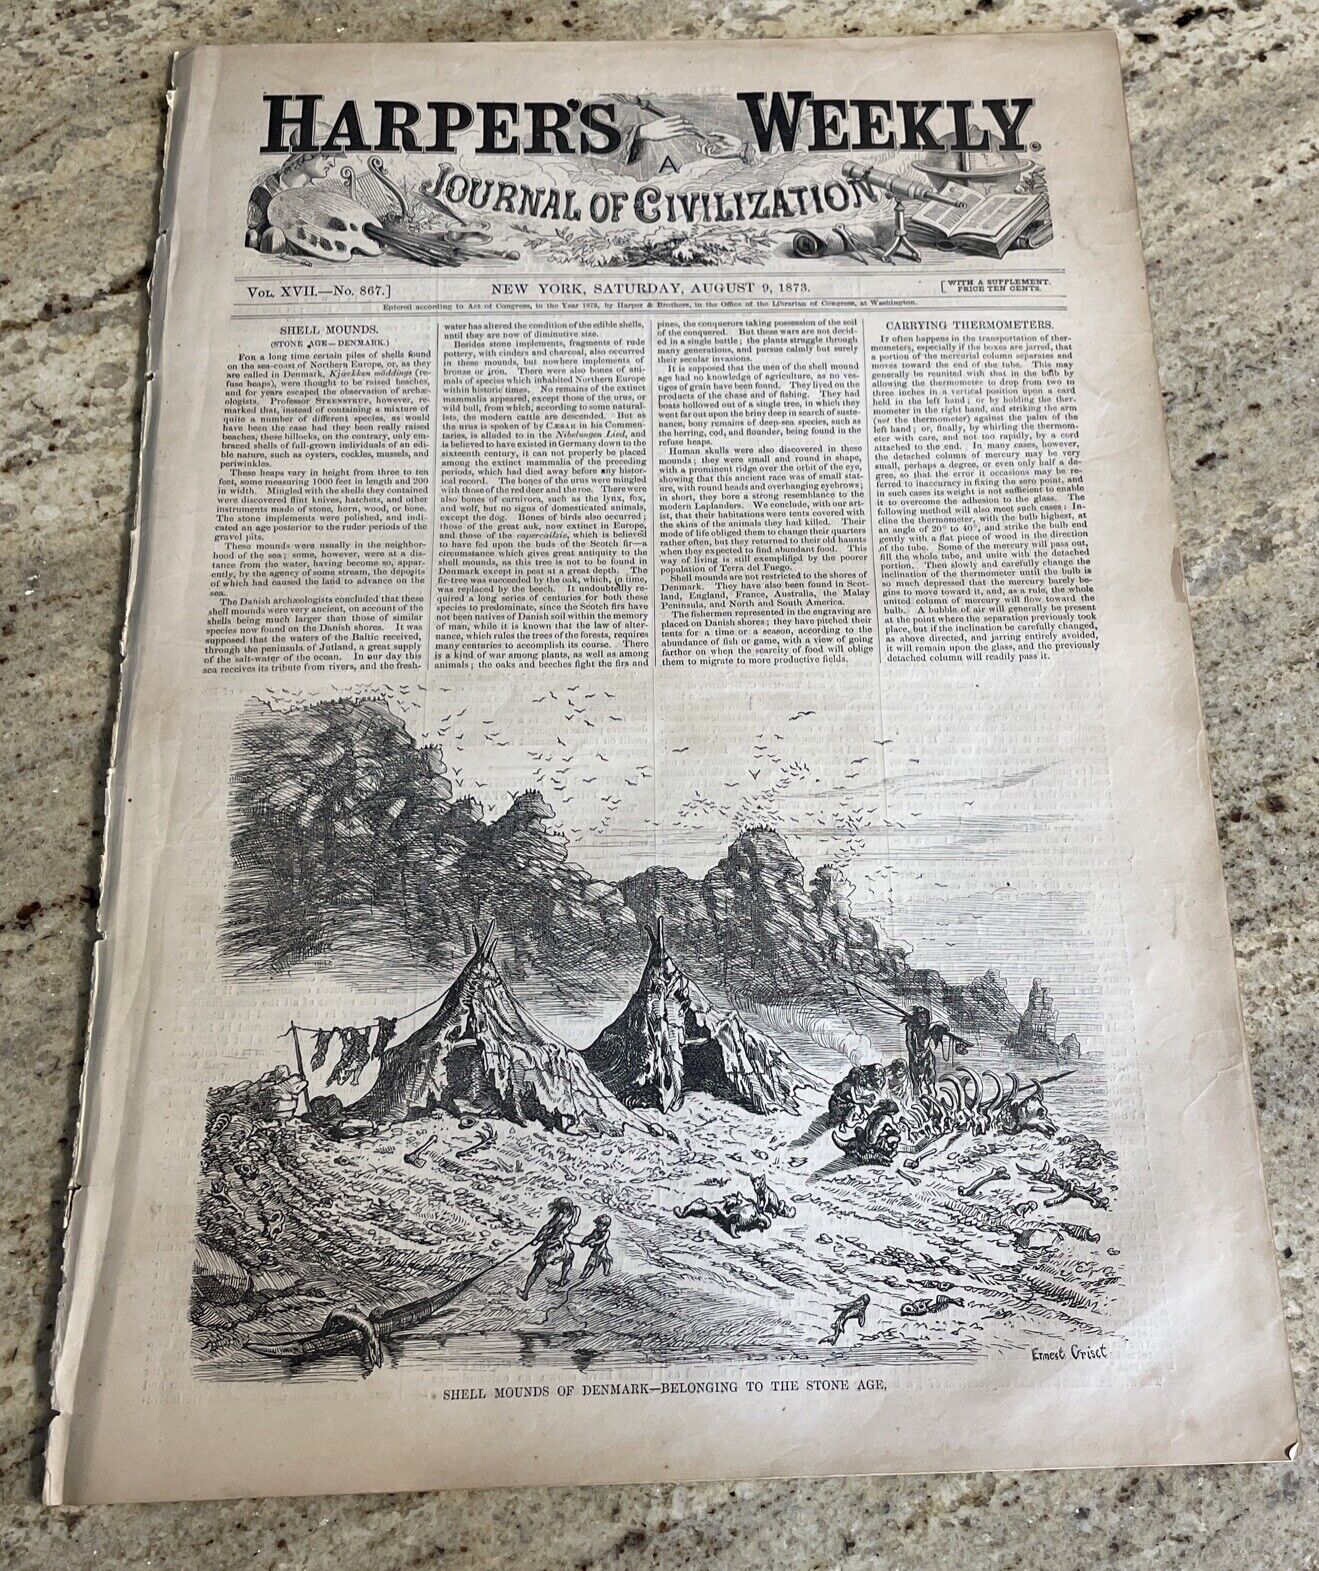 Harper's Weekly August 9, 1873 Niagara Falls, Anthony Trollope - Phineas Redux